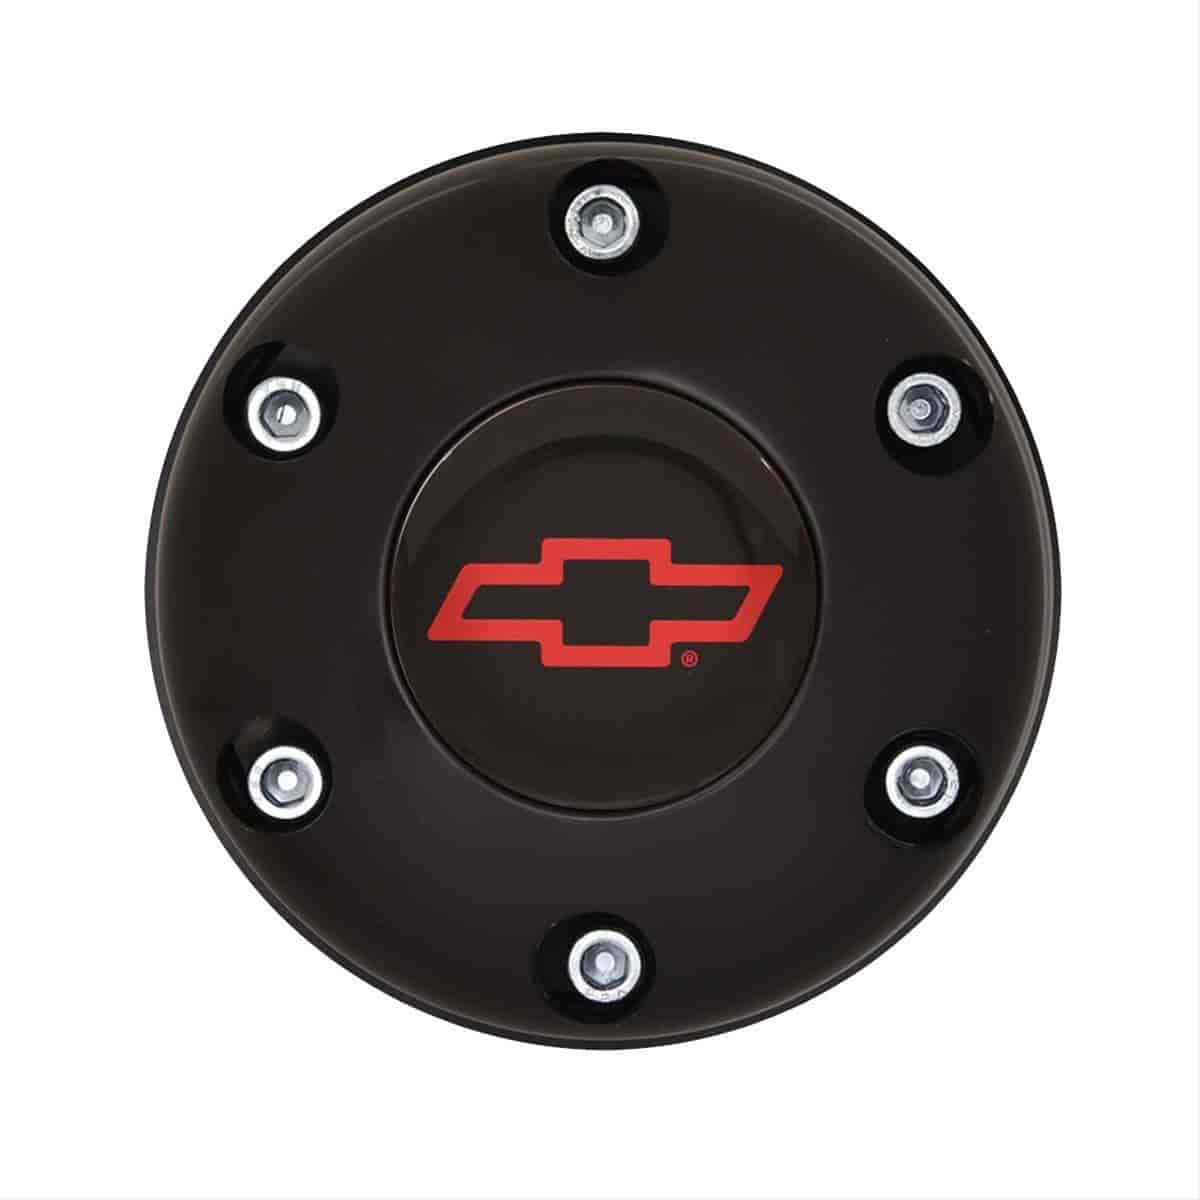 GT3 Gasser/Euro Style Horn Button Chevy Bowtie Colored 6-Hole Style Black Anodized